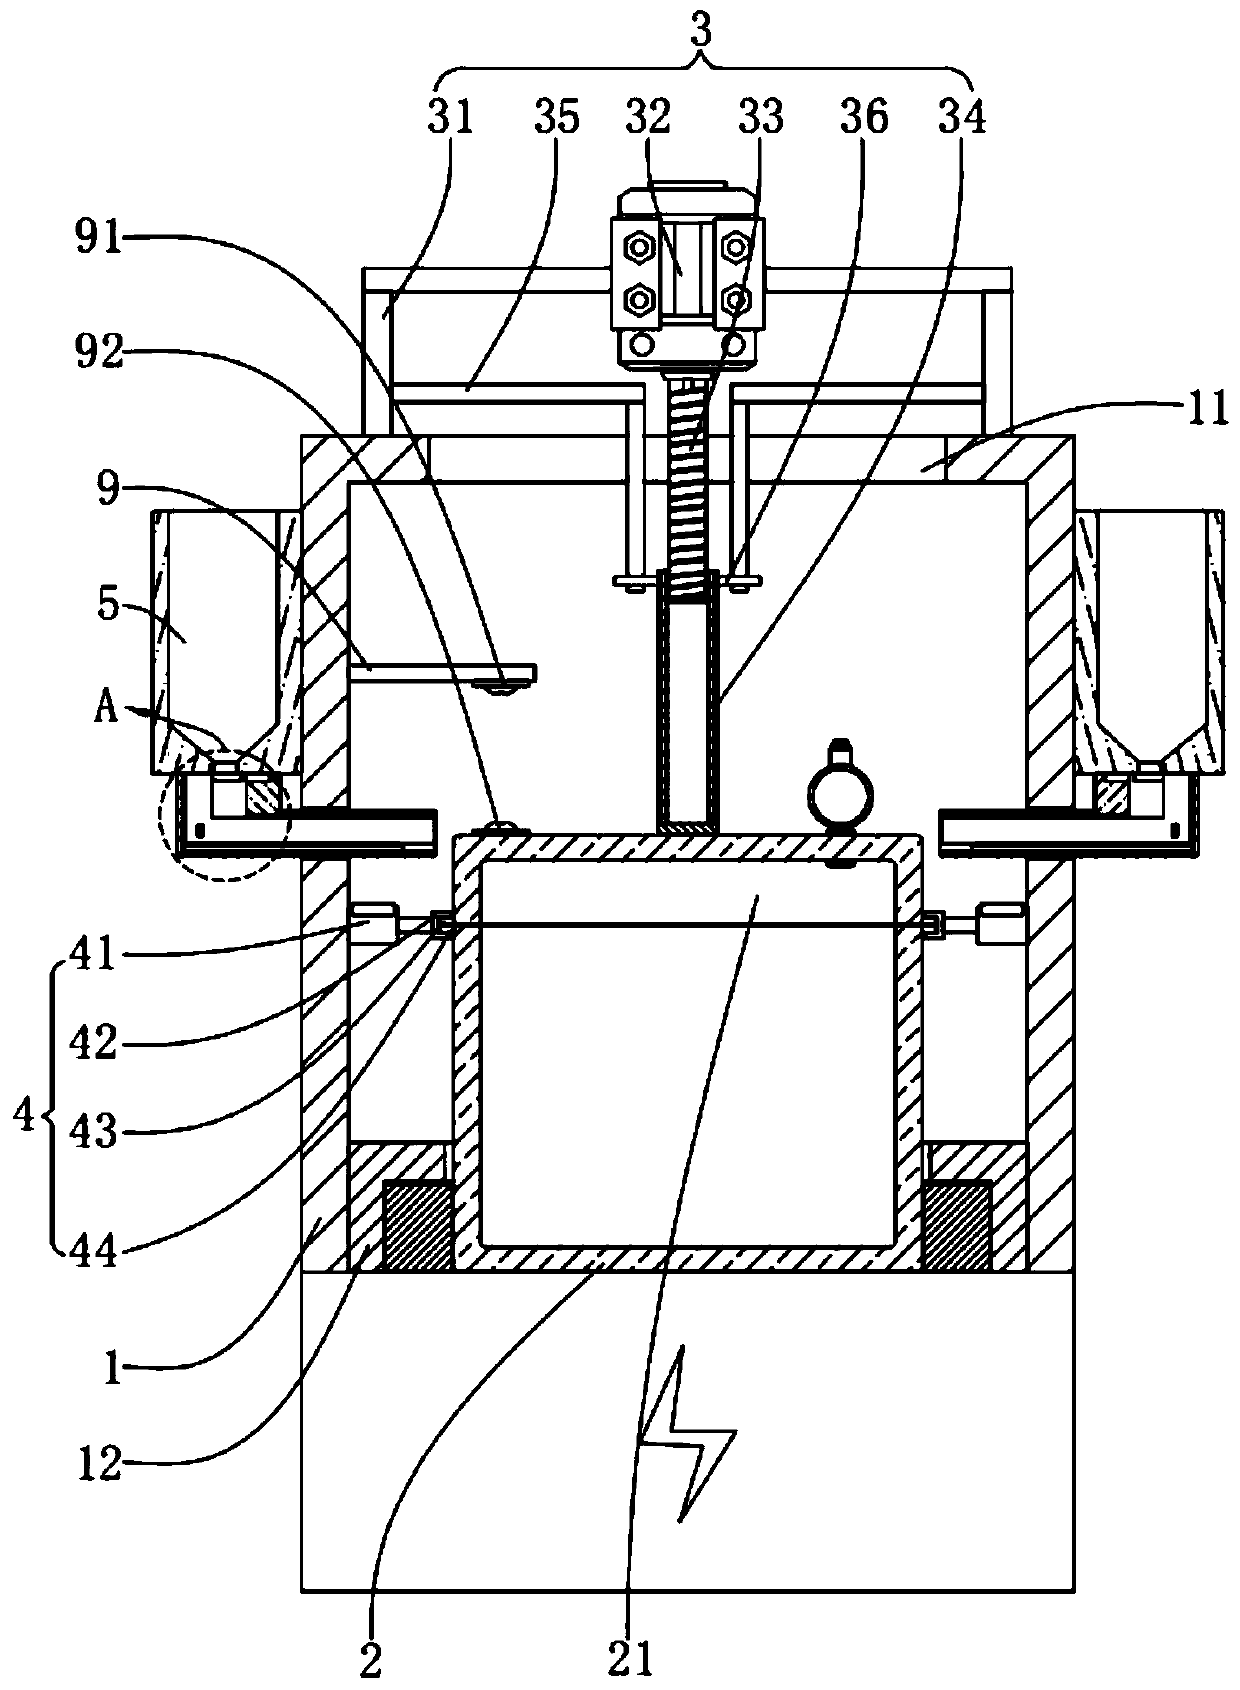 Proportional-intelligent-adjusted meat boiling system for dried-meat-floss processing